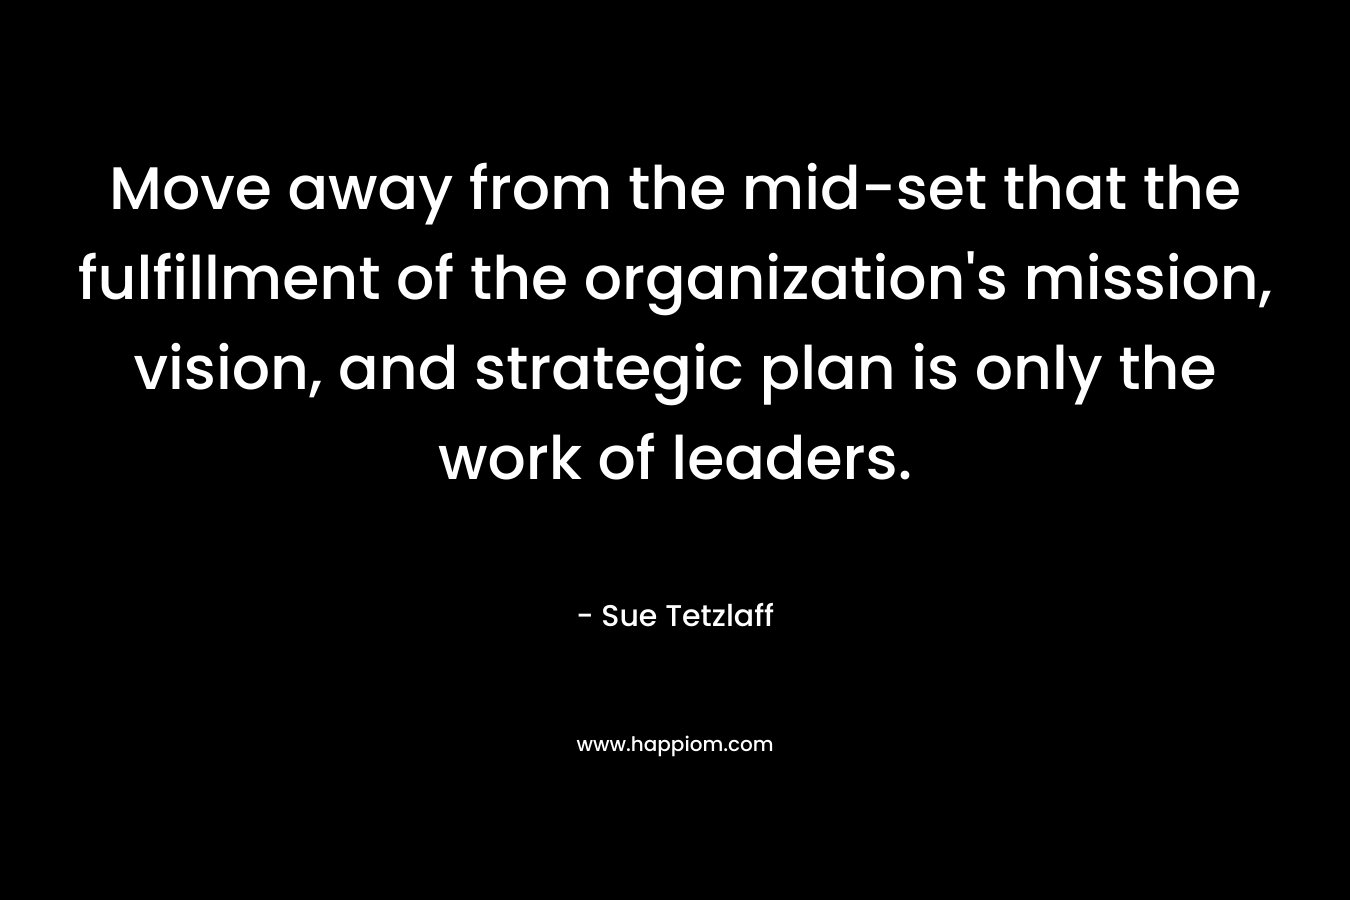 Move away from the mid-set that the fulfillment of the organization’s mission, vision, and strategic plan is only the work of leaders. – Sue Tetzlaff